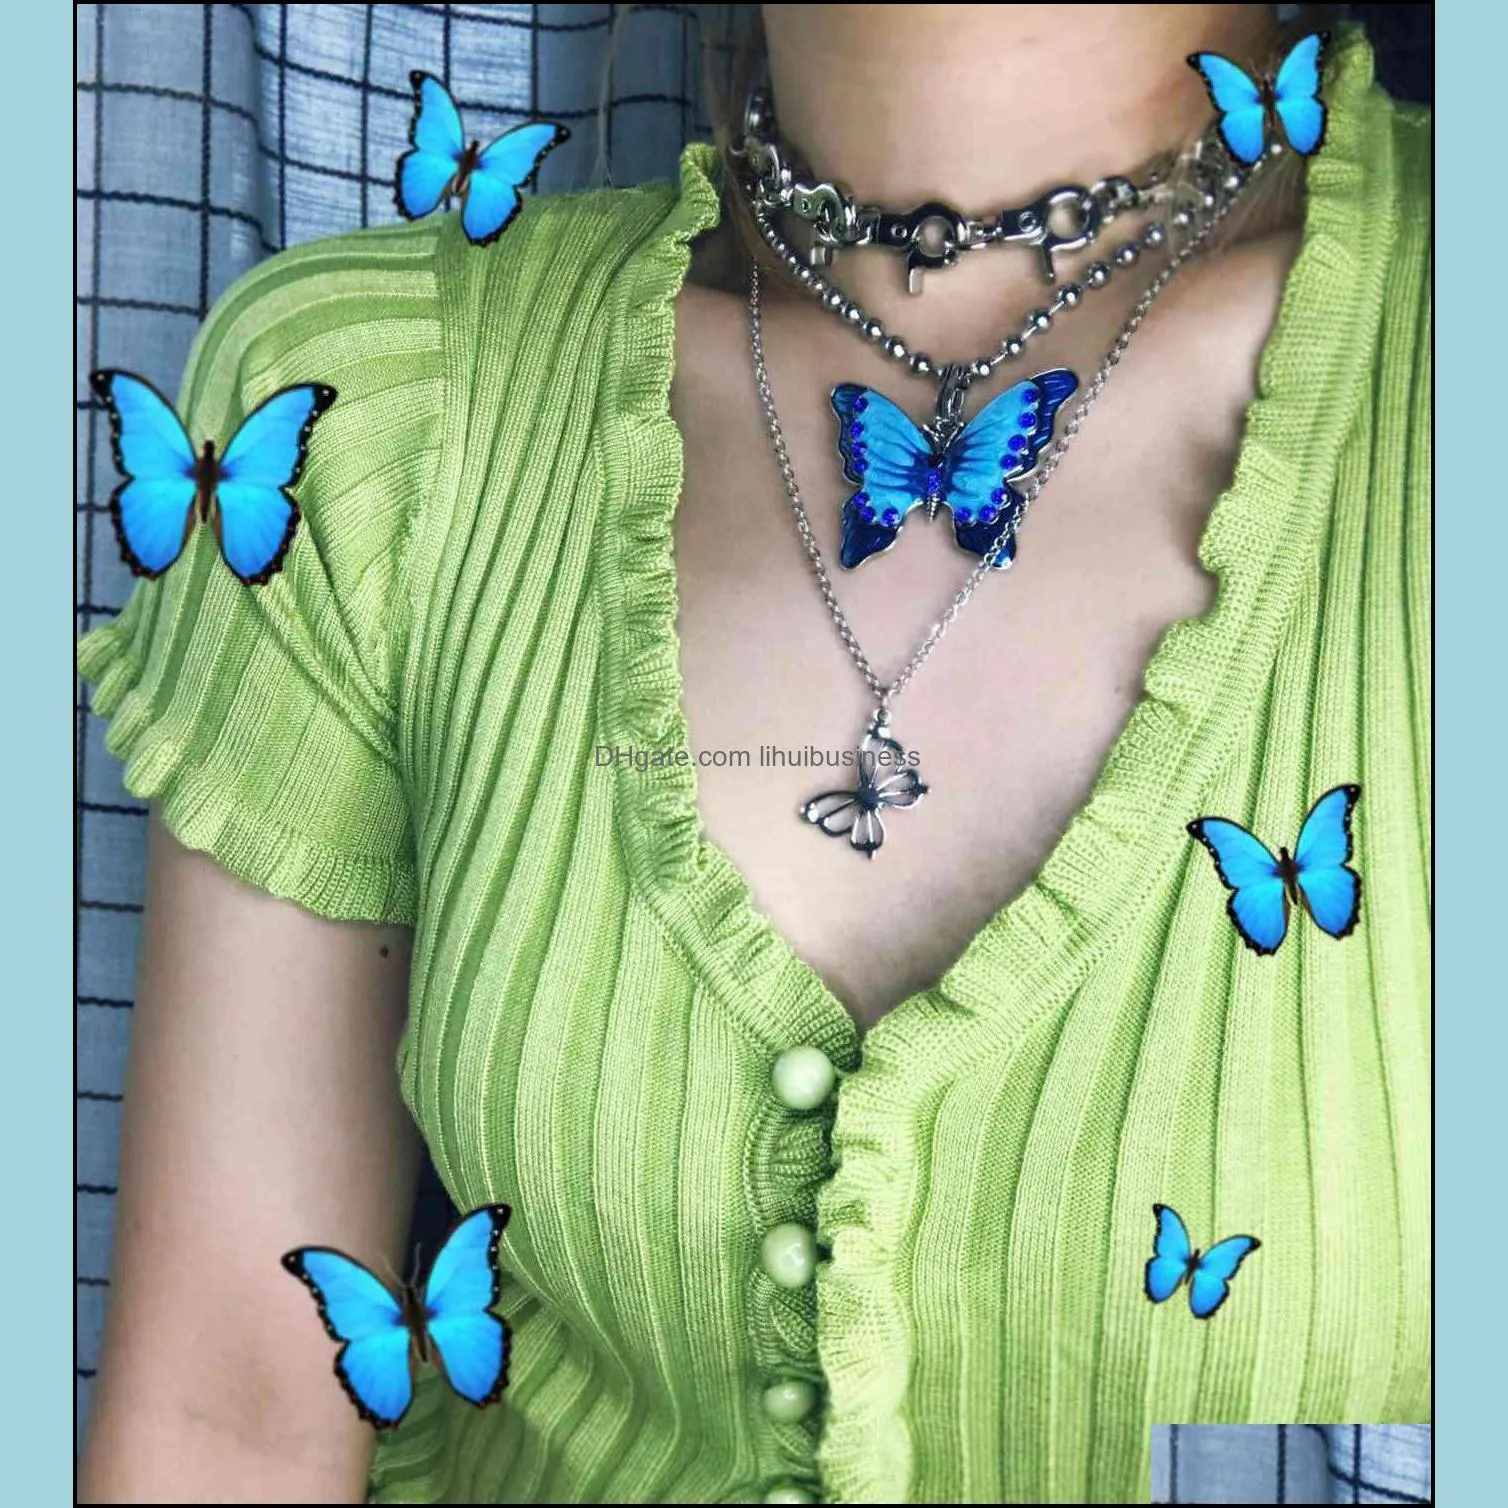 Ins girl Butterfly Pendant Necklaces Women Vintage Harajuku Stainless Steel Letter Beads Choker Cool Girls Punk Sliver Chain Y0309